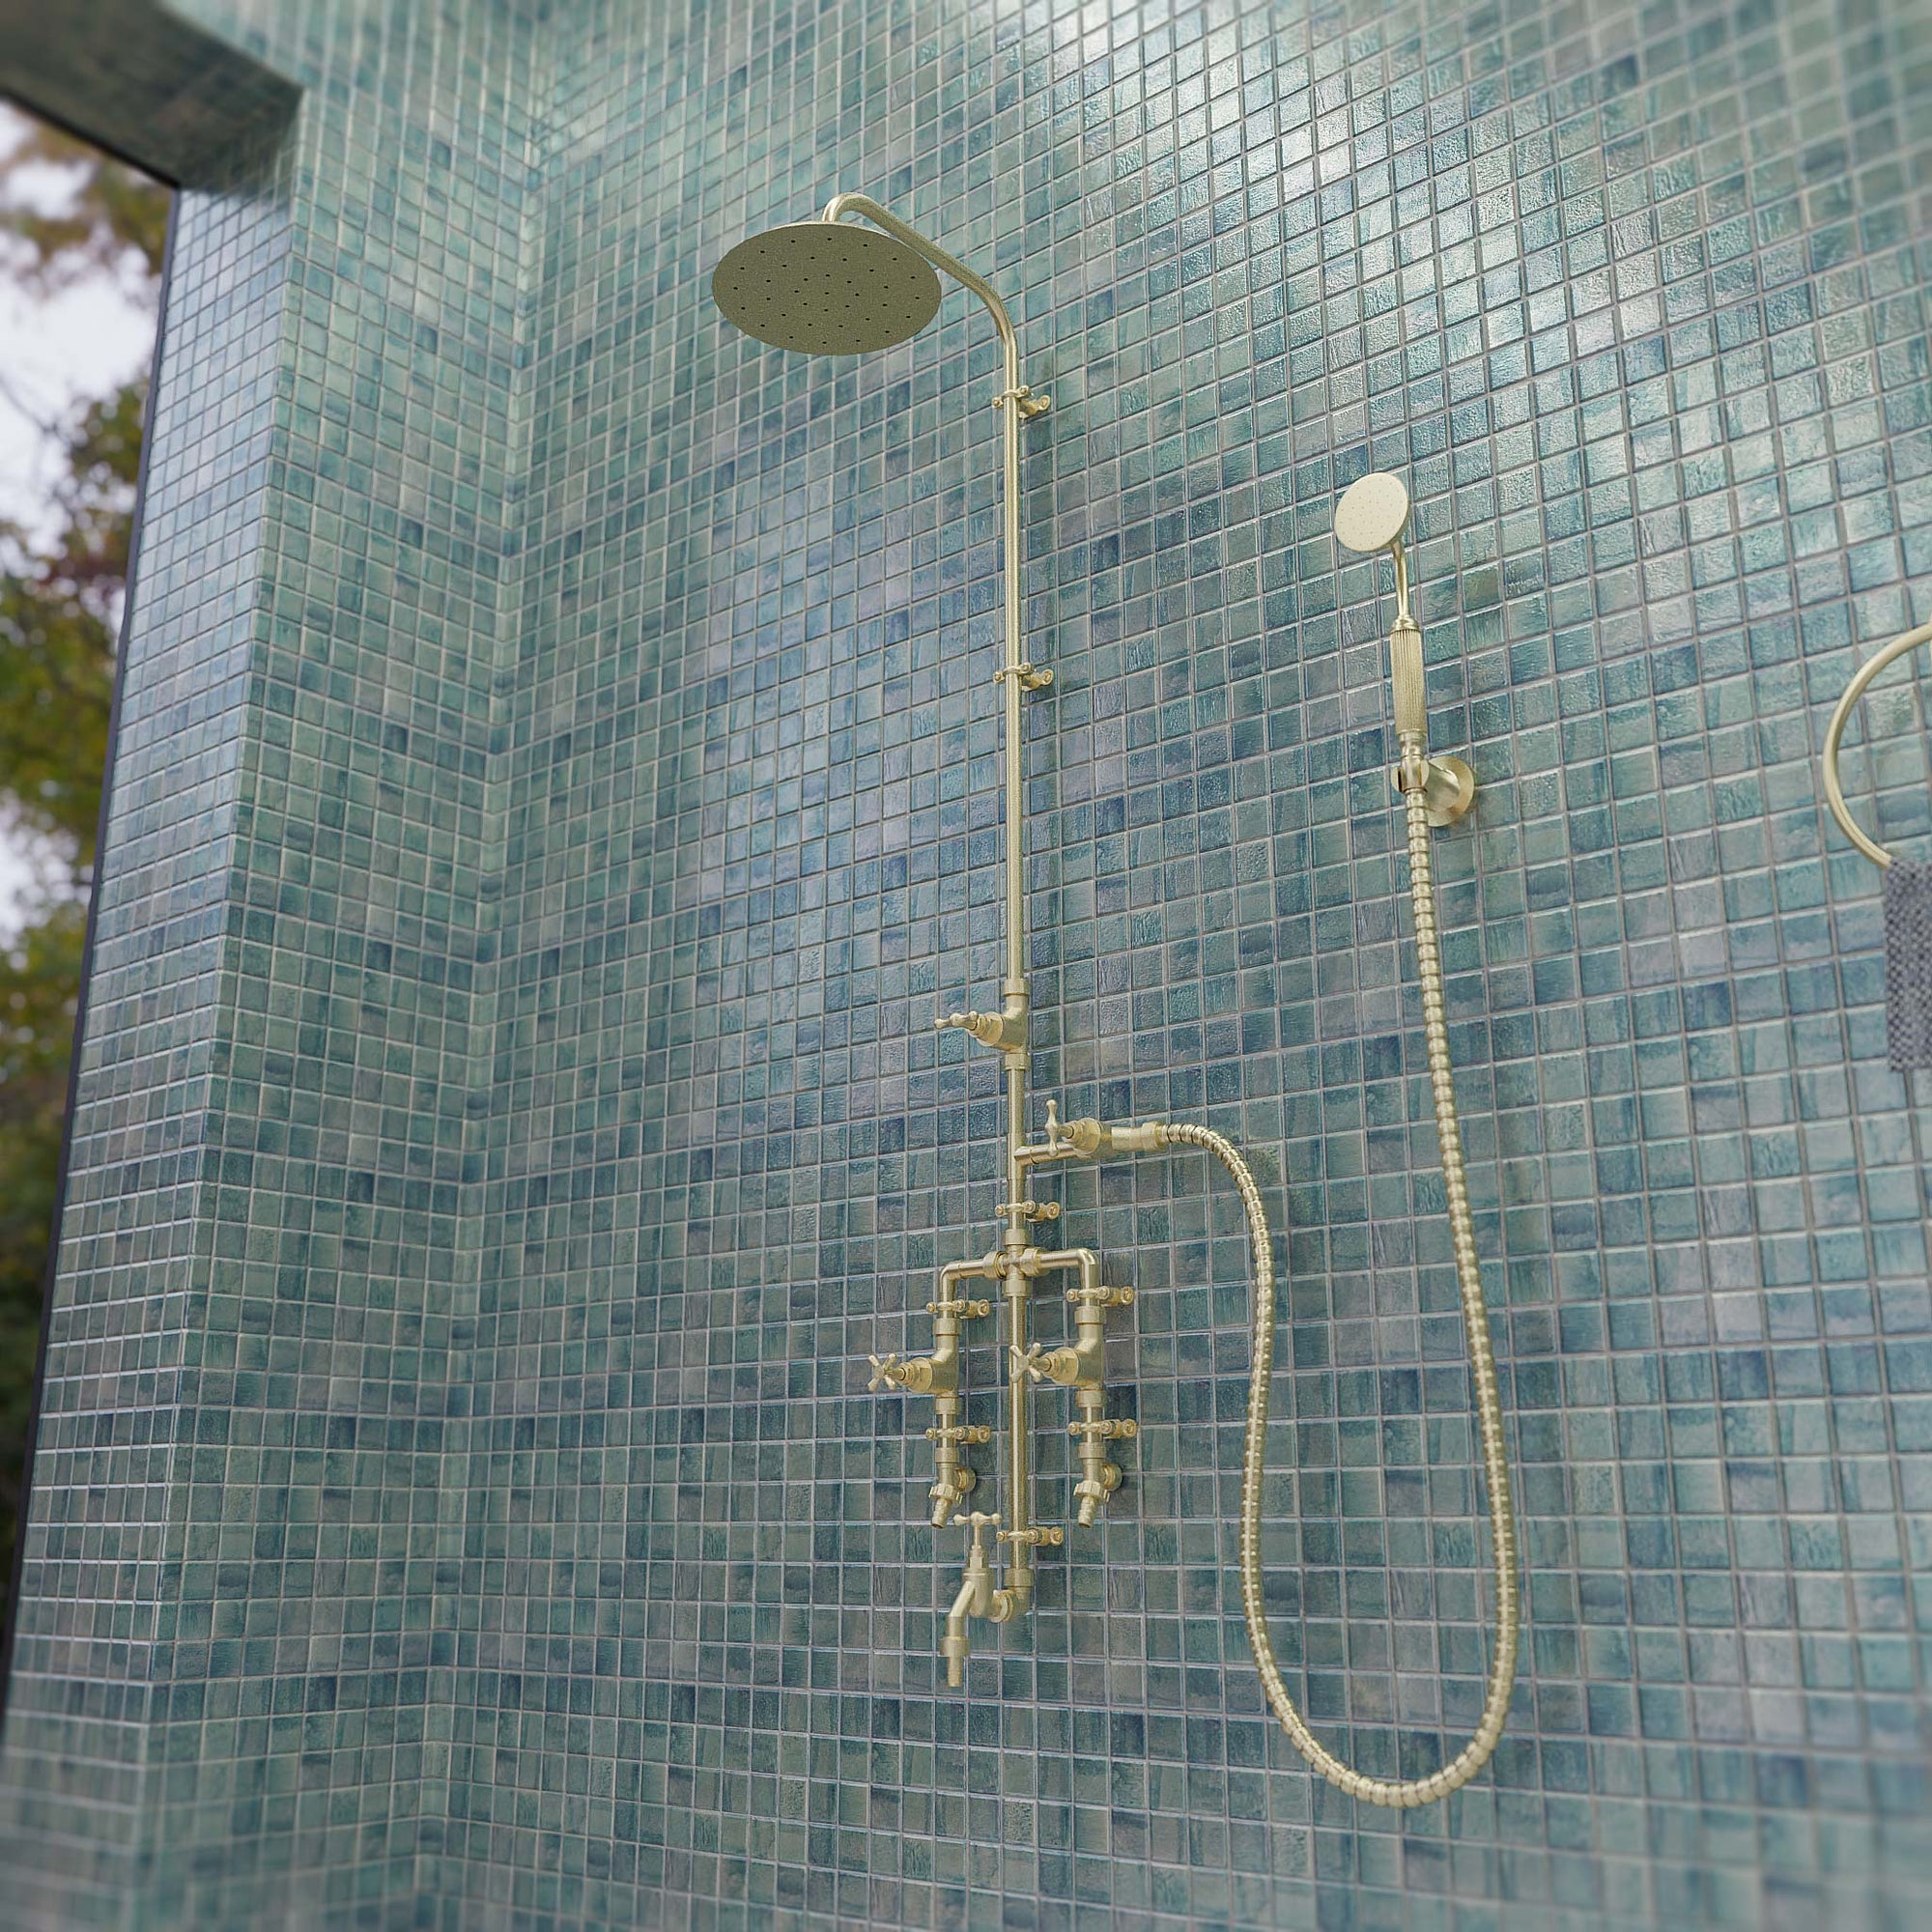 Brass seducto shower in bathroom on blue tiles